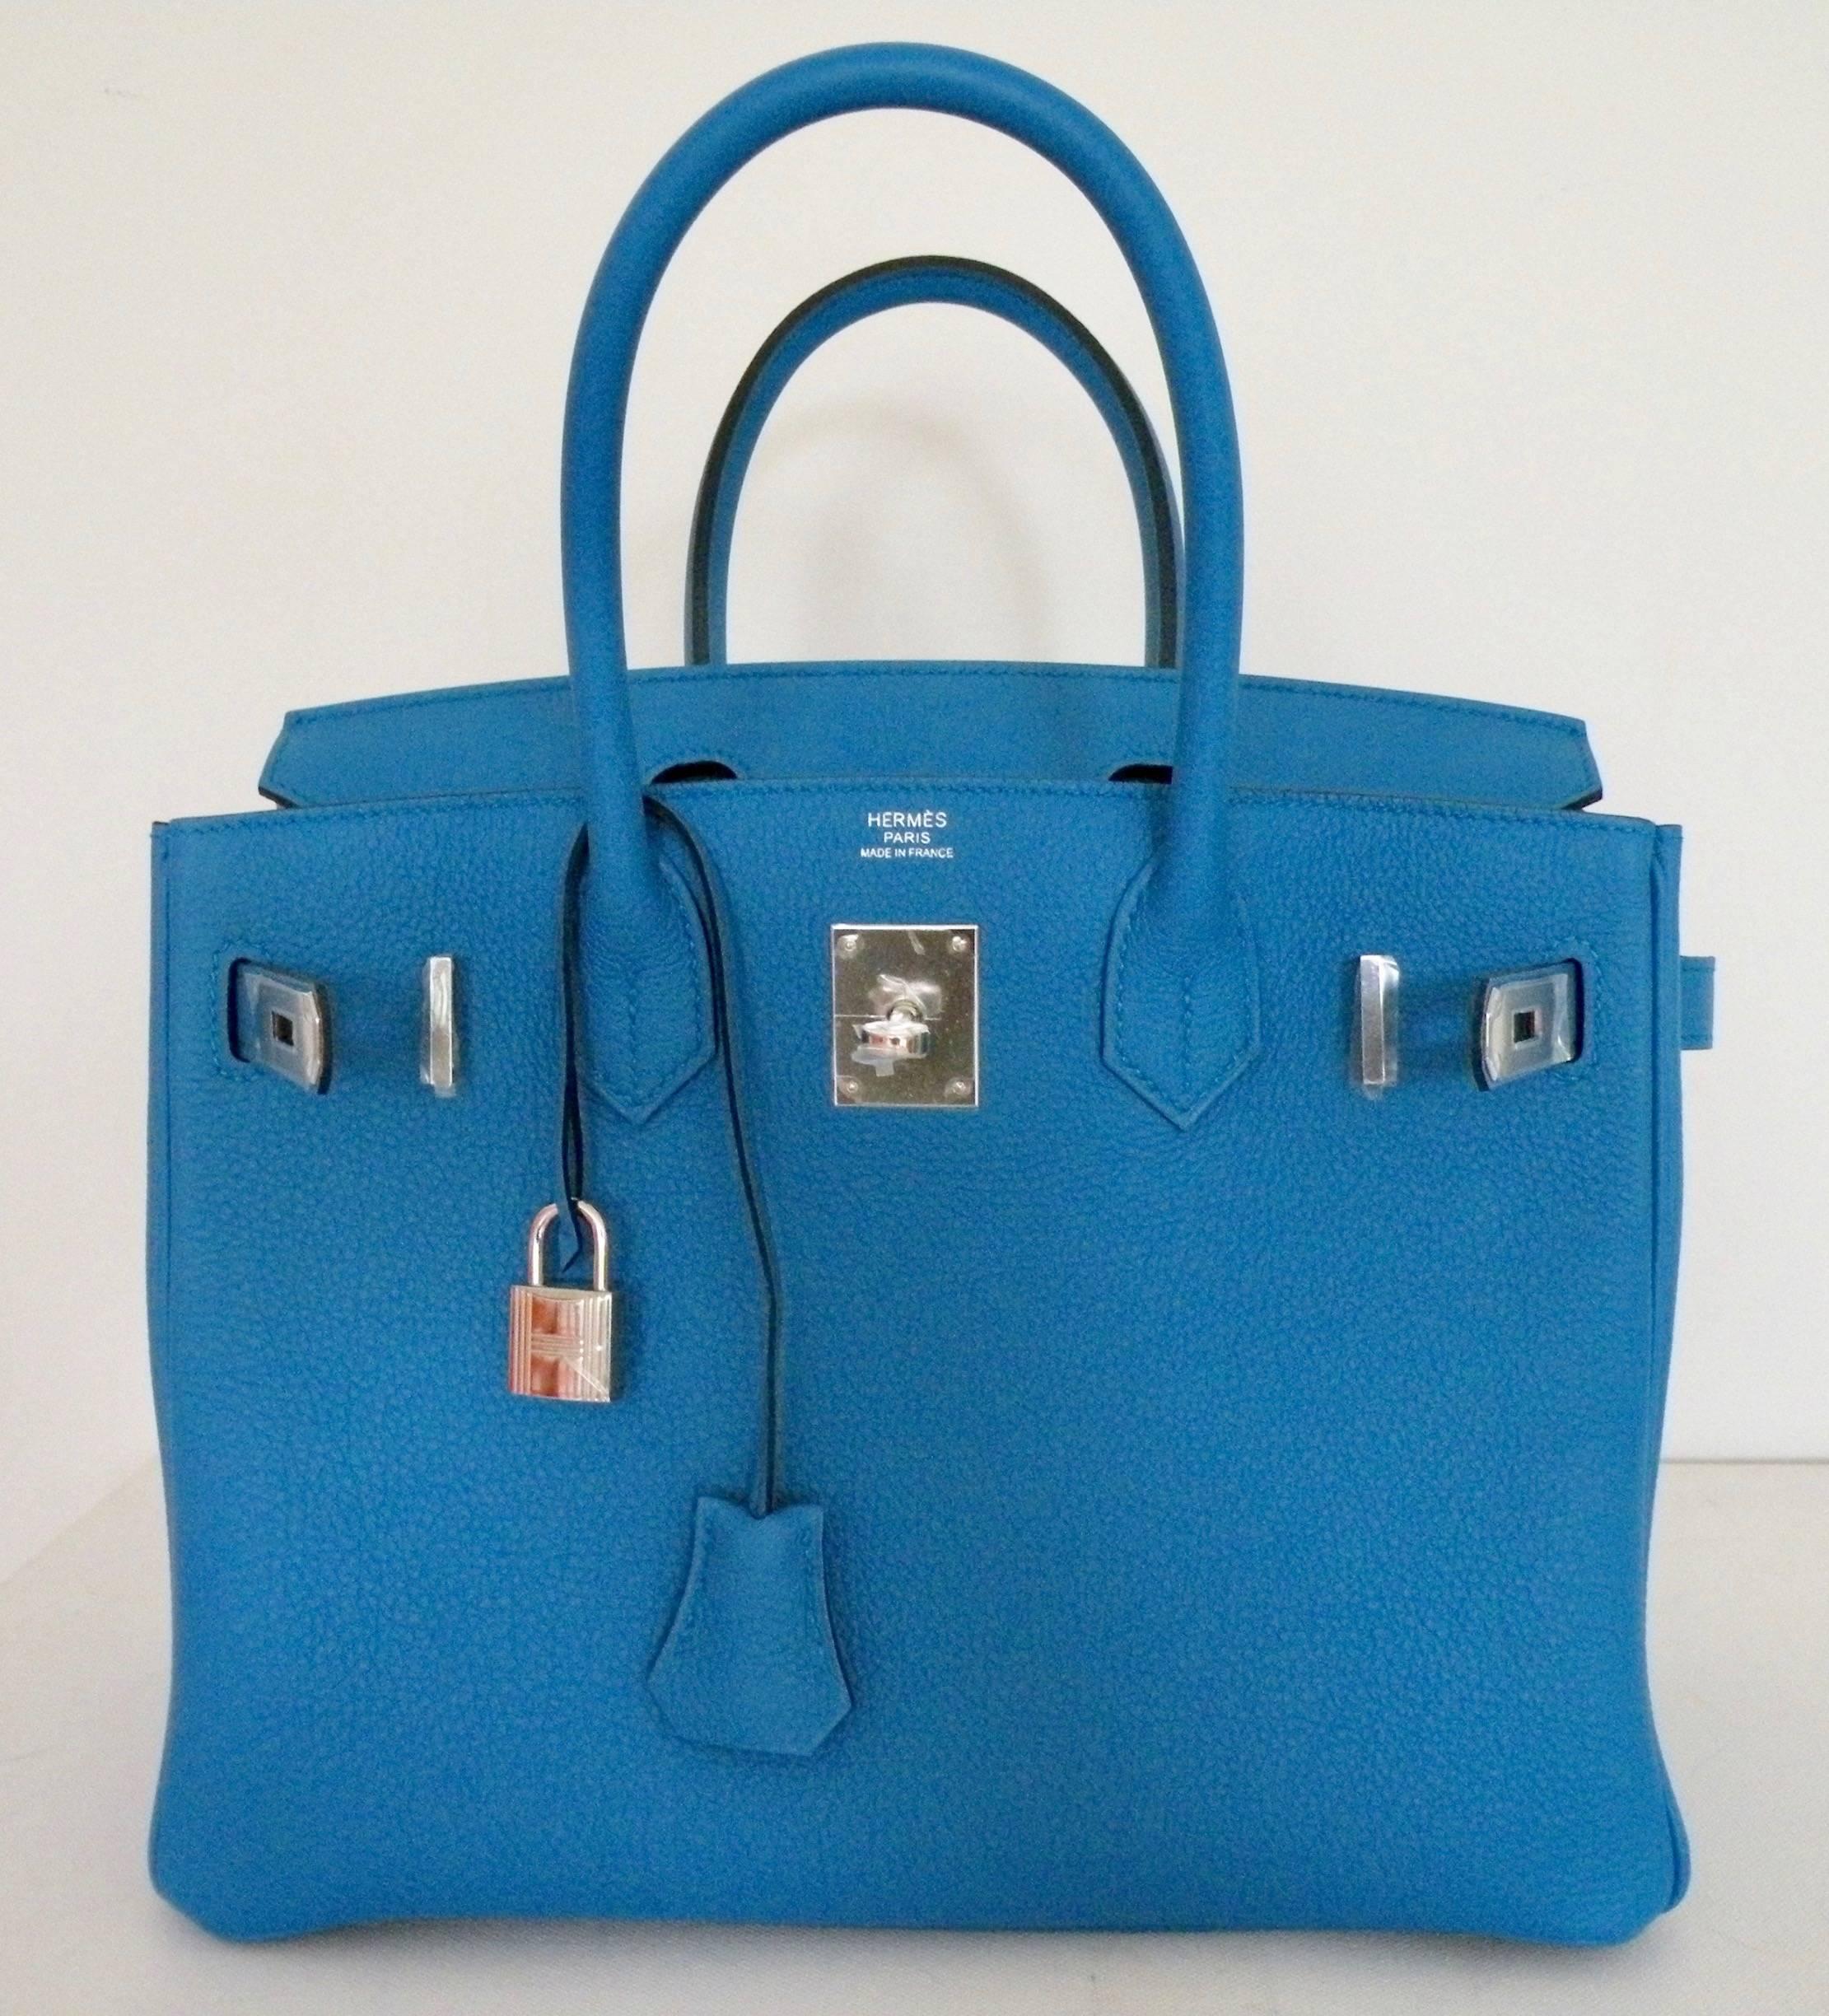 HERMES

Limited Edition called the Verso
The outside is Blue Zanzibar
And the inside is Malachite
30cm Size Birkin
New Color

Tonal Stitching

Palladium Hardware


Brand New

Never used

Plastic on the hardware




Of course you dont have to ask it